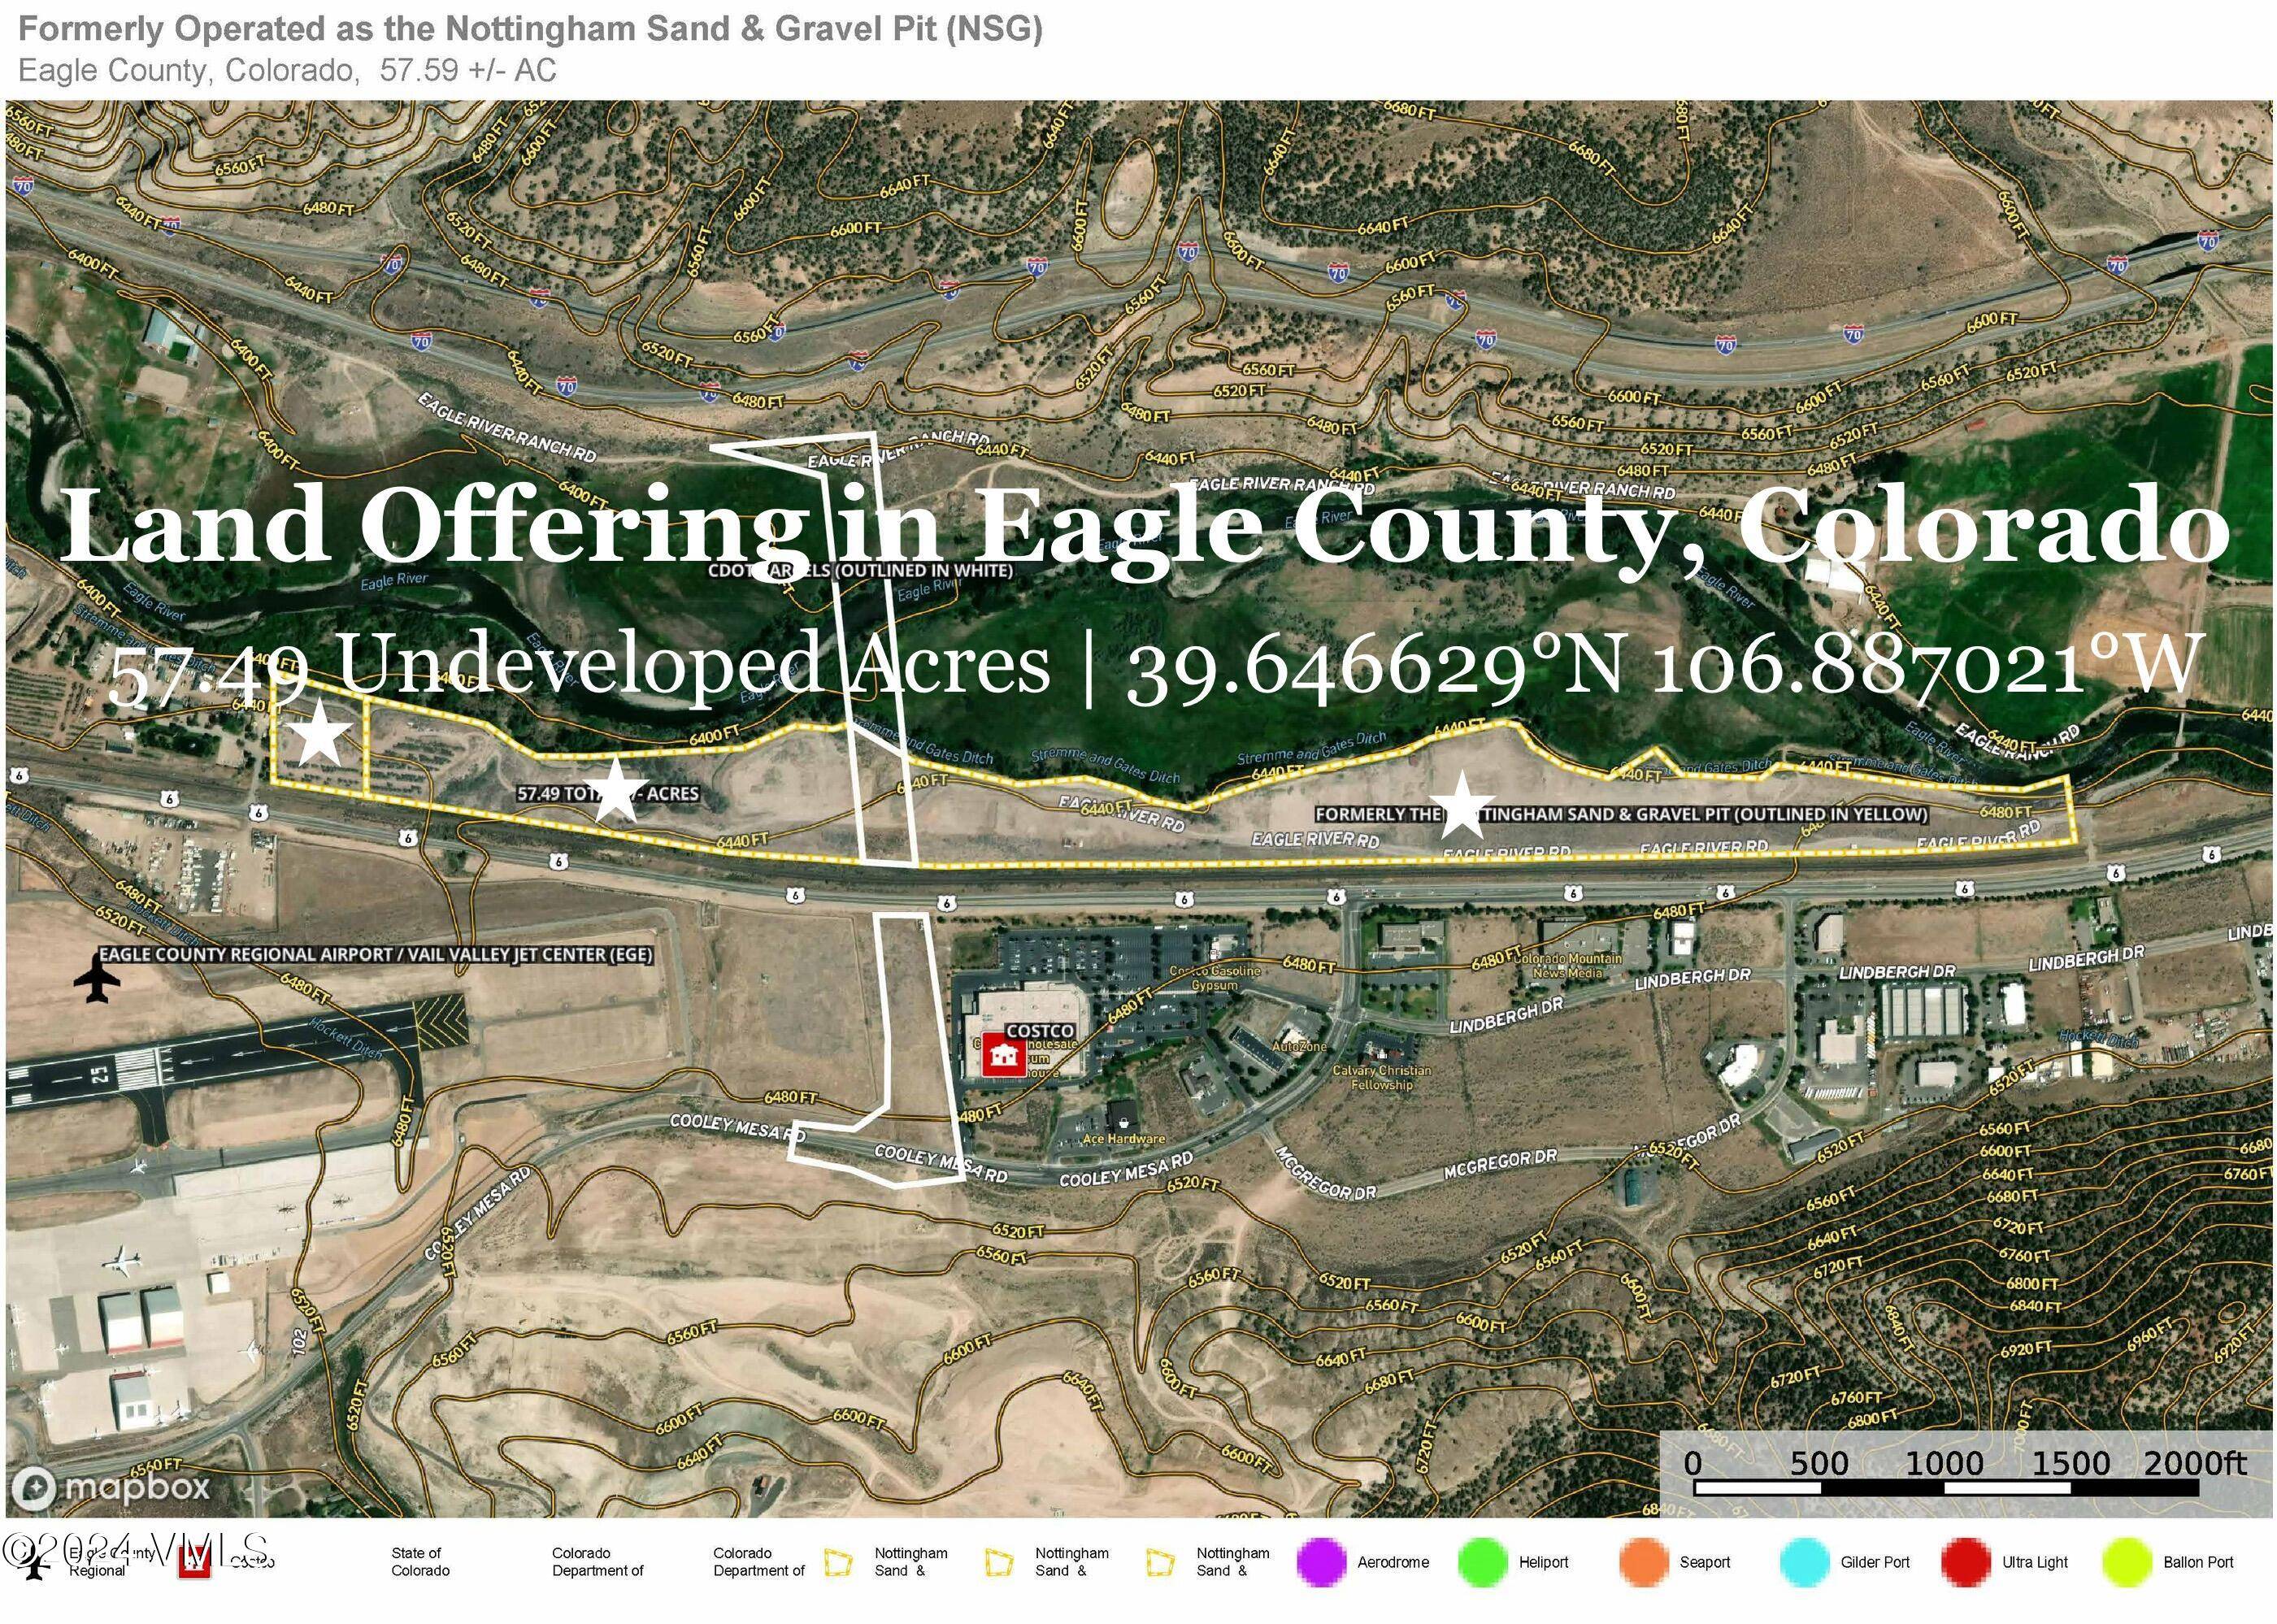 This offering is a 57. 59 acre 'undeveloped' property located in unincorporated Eagle County, Colorado.